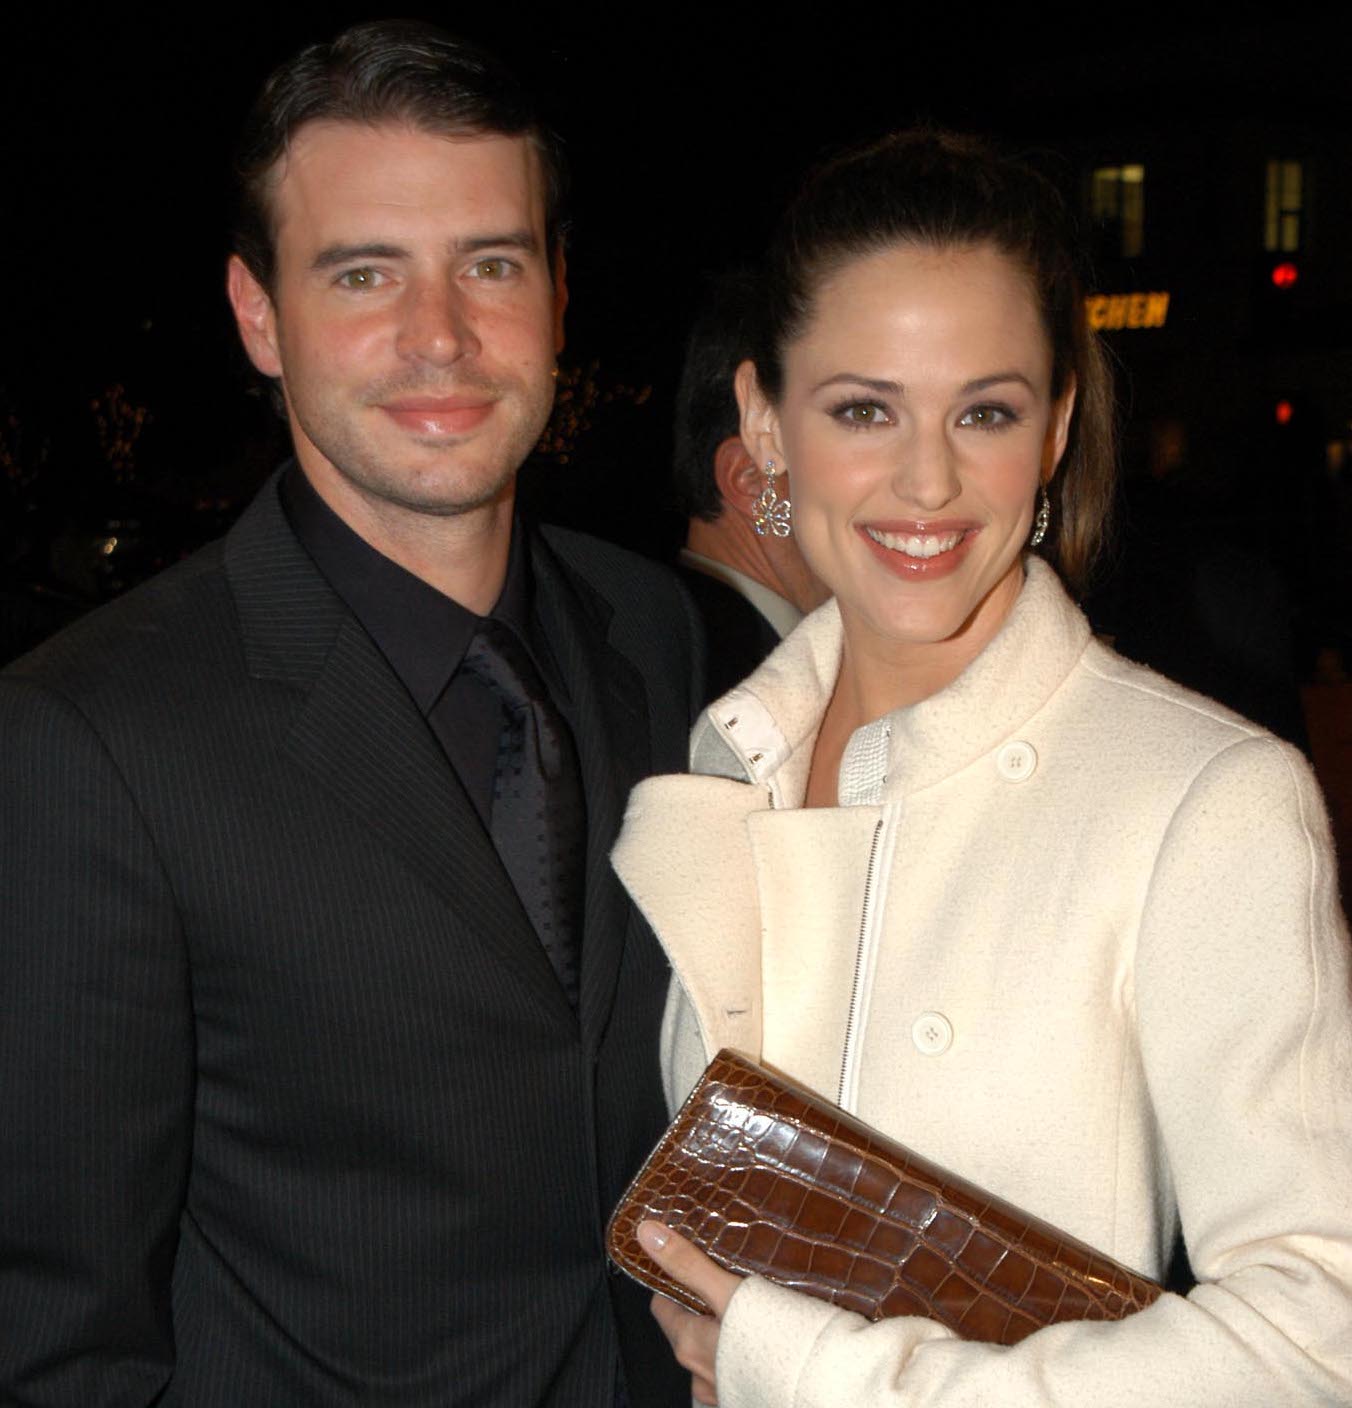 Scott Foley and Jennifer Garner attending the DreamWorks Premiere of 'Catch Me If You Can' 